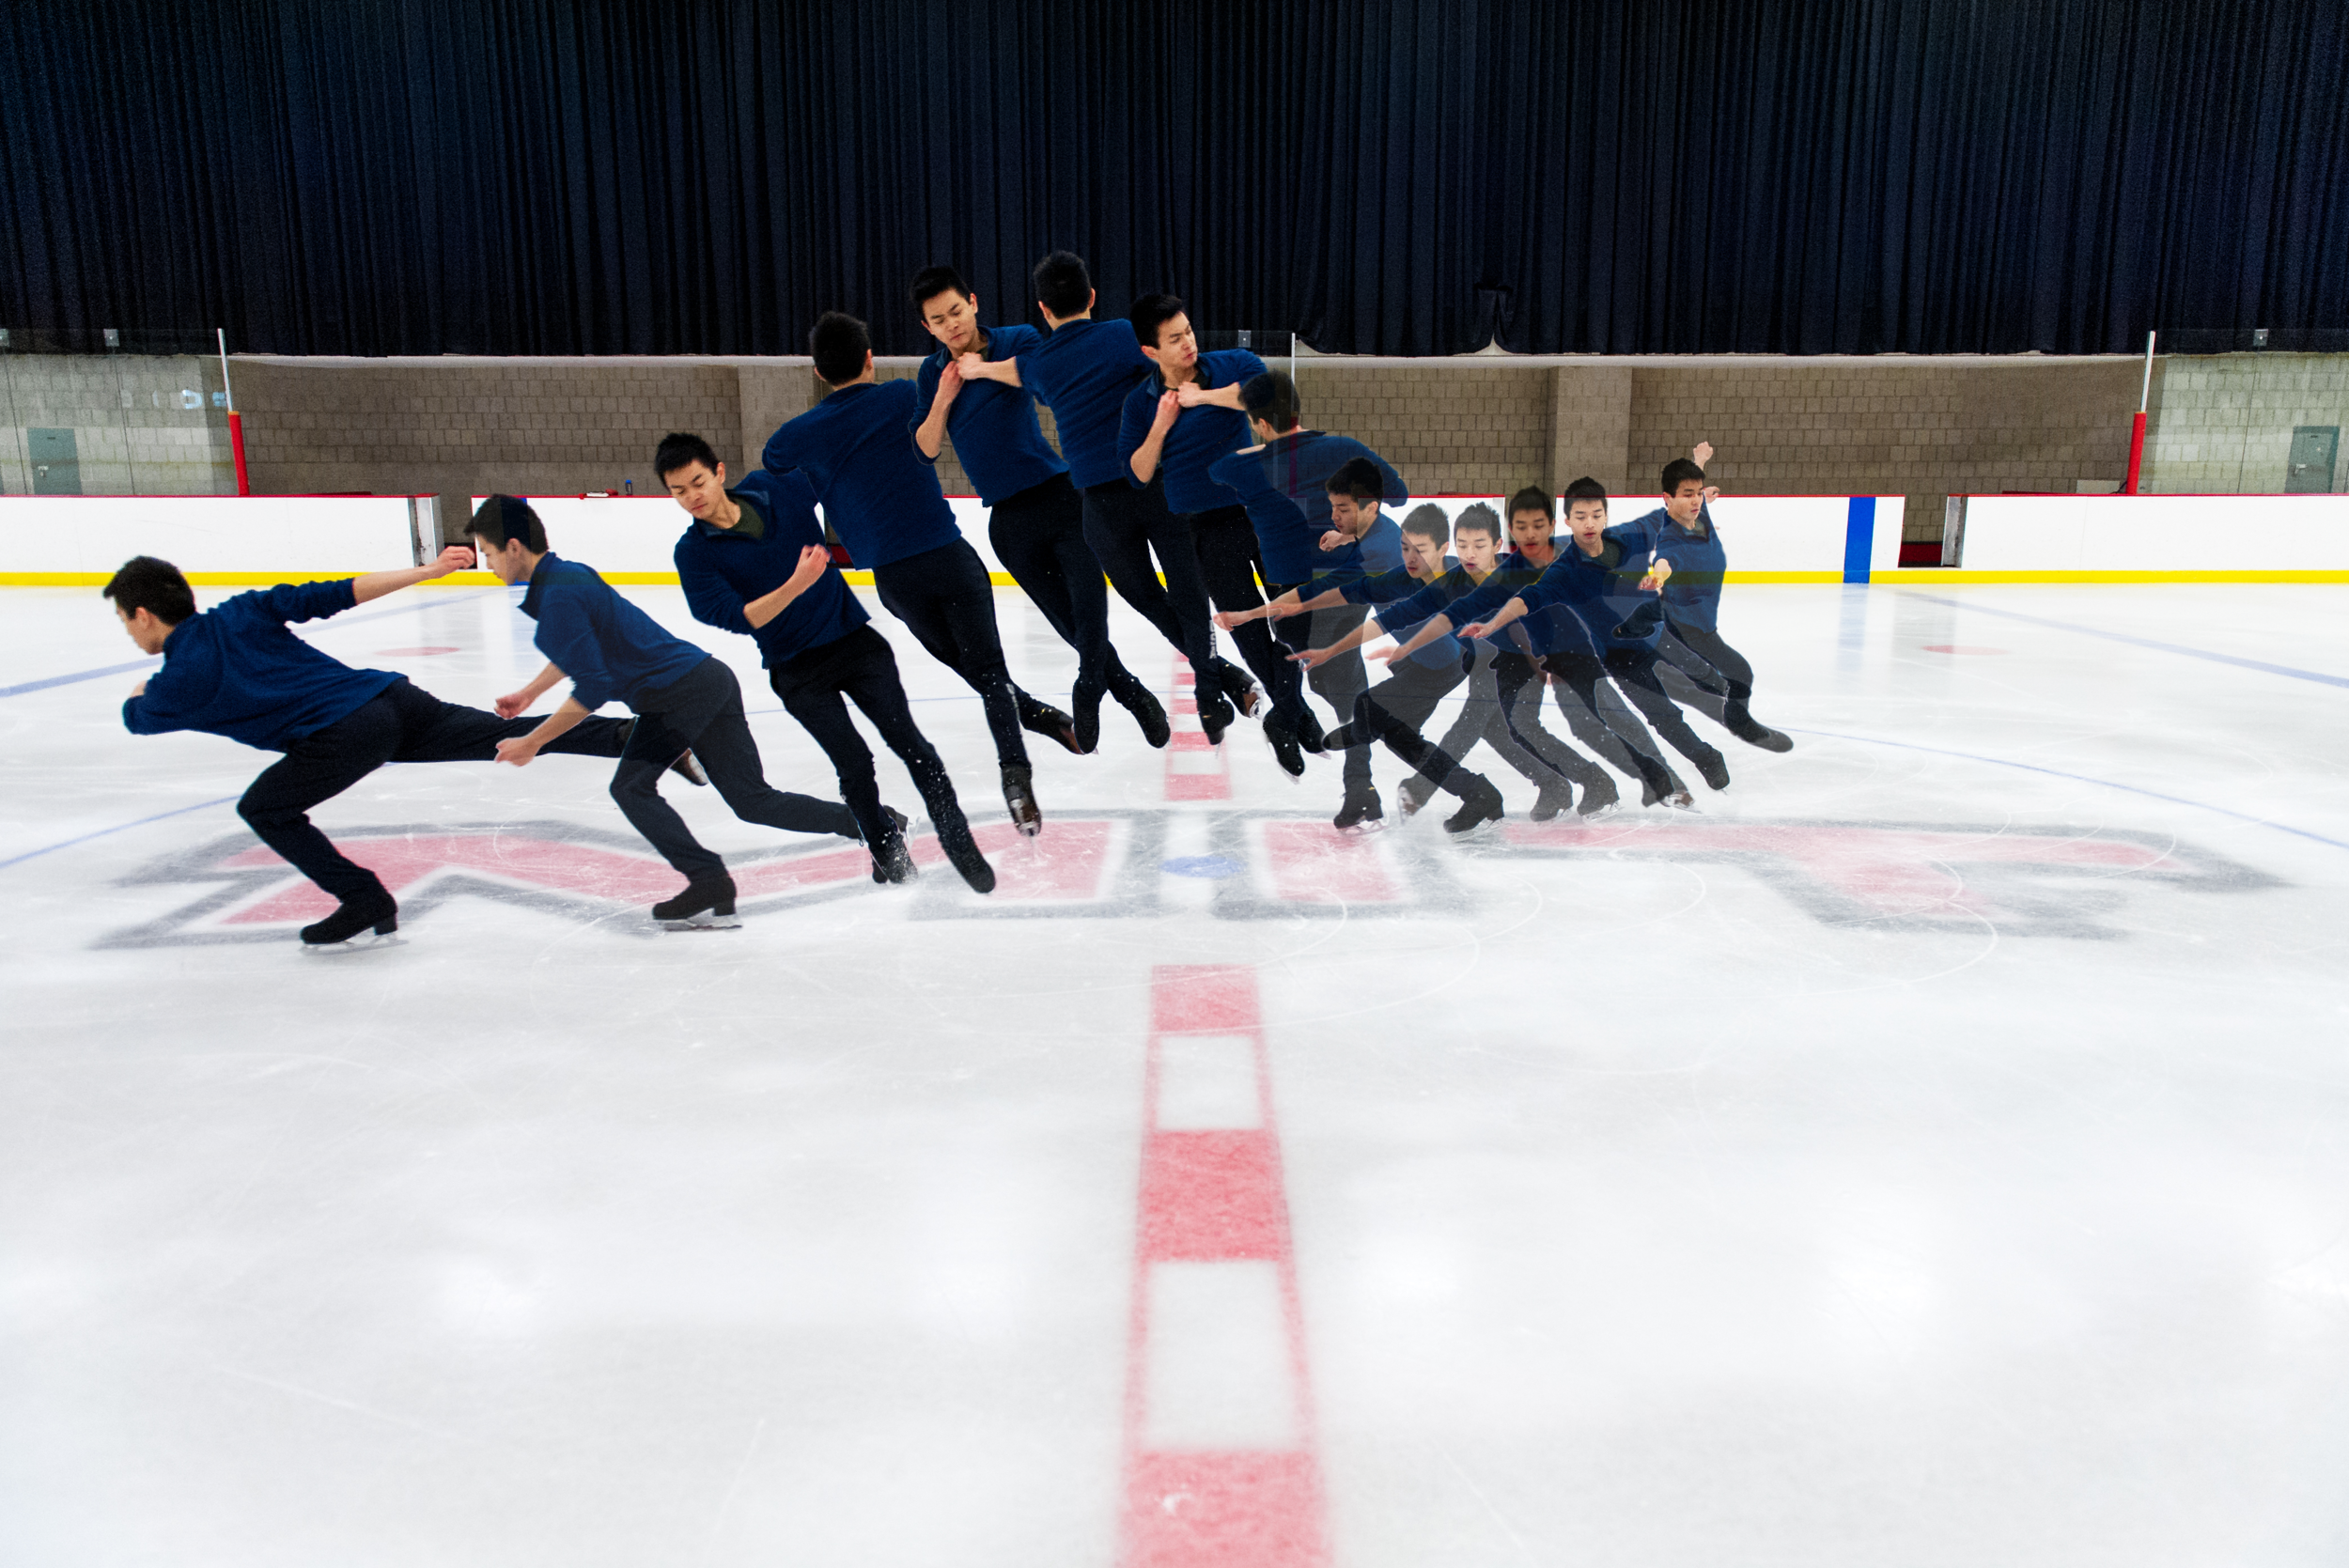 Exploring the intersections of athleticism and artistry on home ice at MIT.